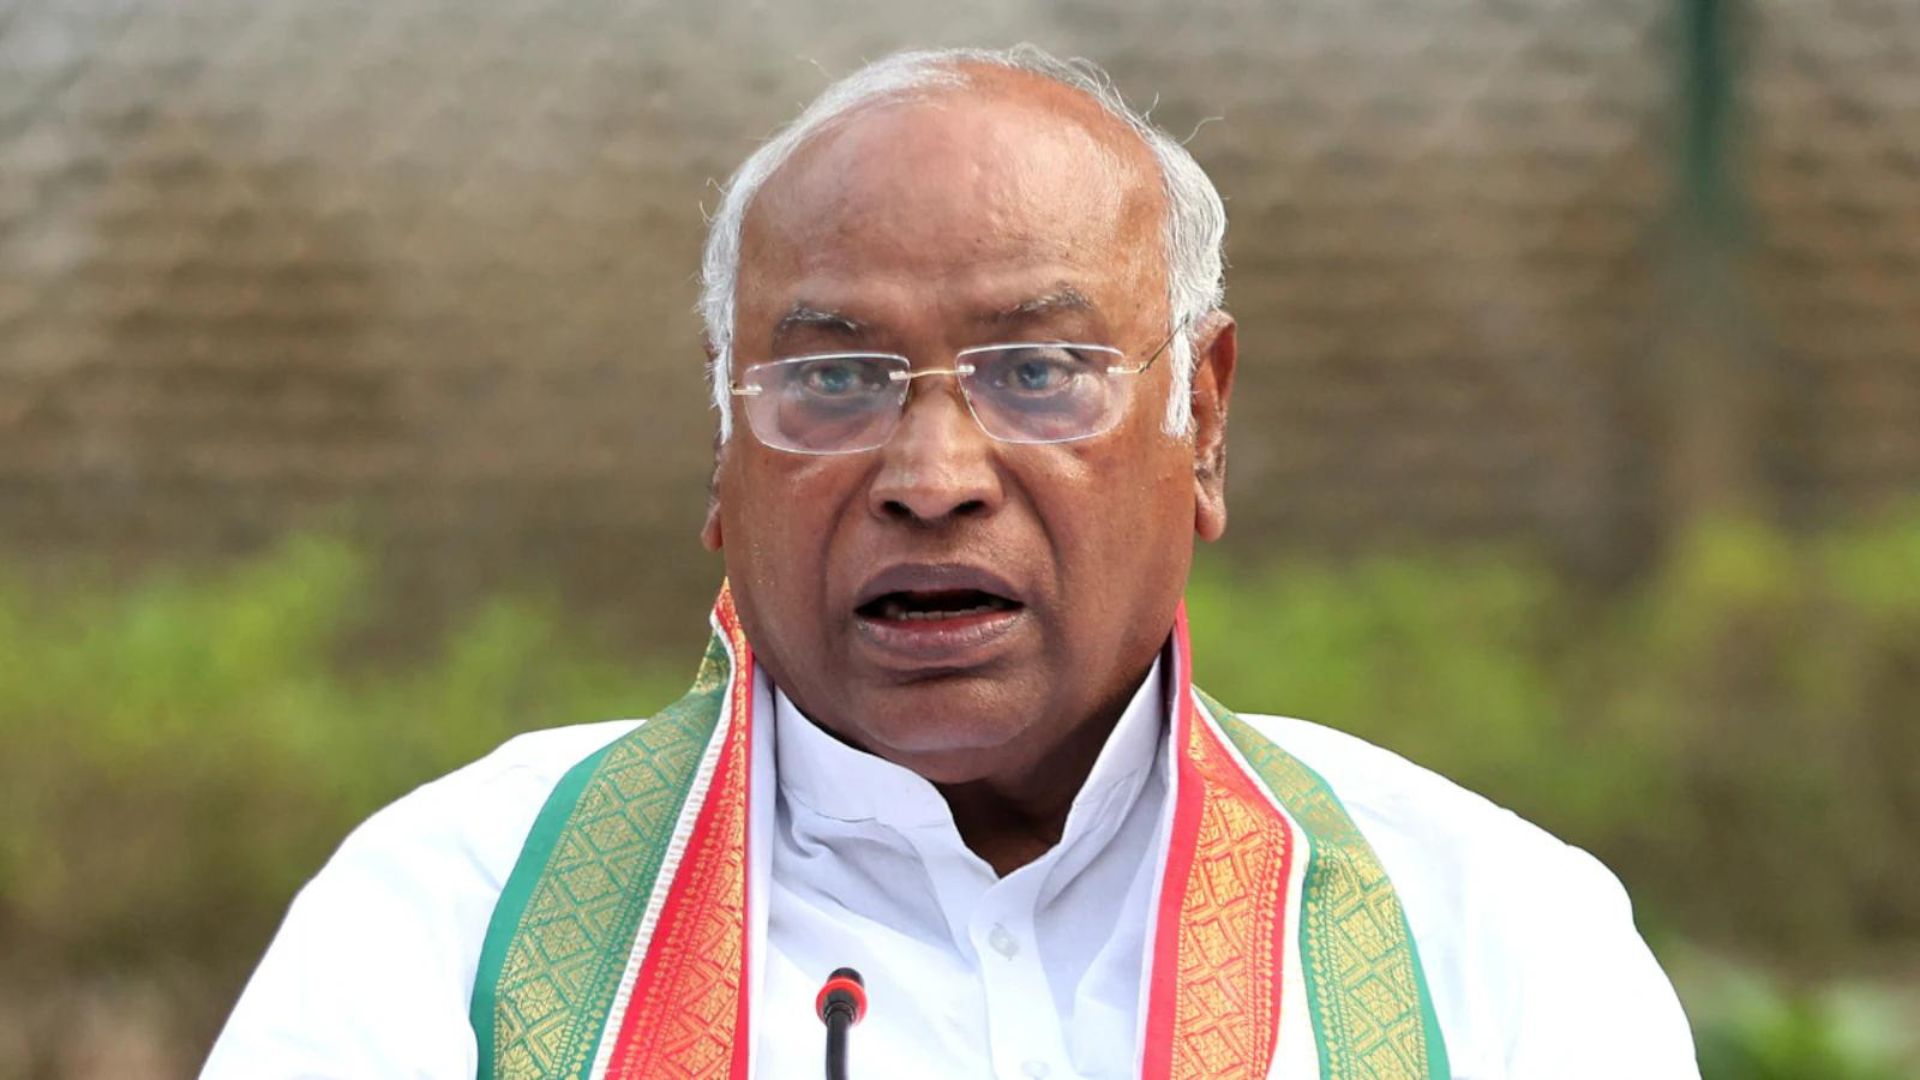 Betrayal Of J&K continues Unabated, Govt wants To Delay Restoration Of Full Statehood, Says Kharge